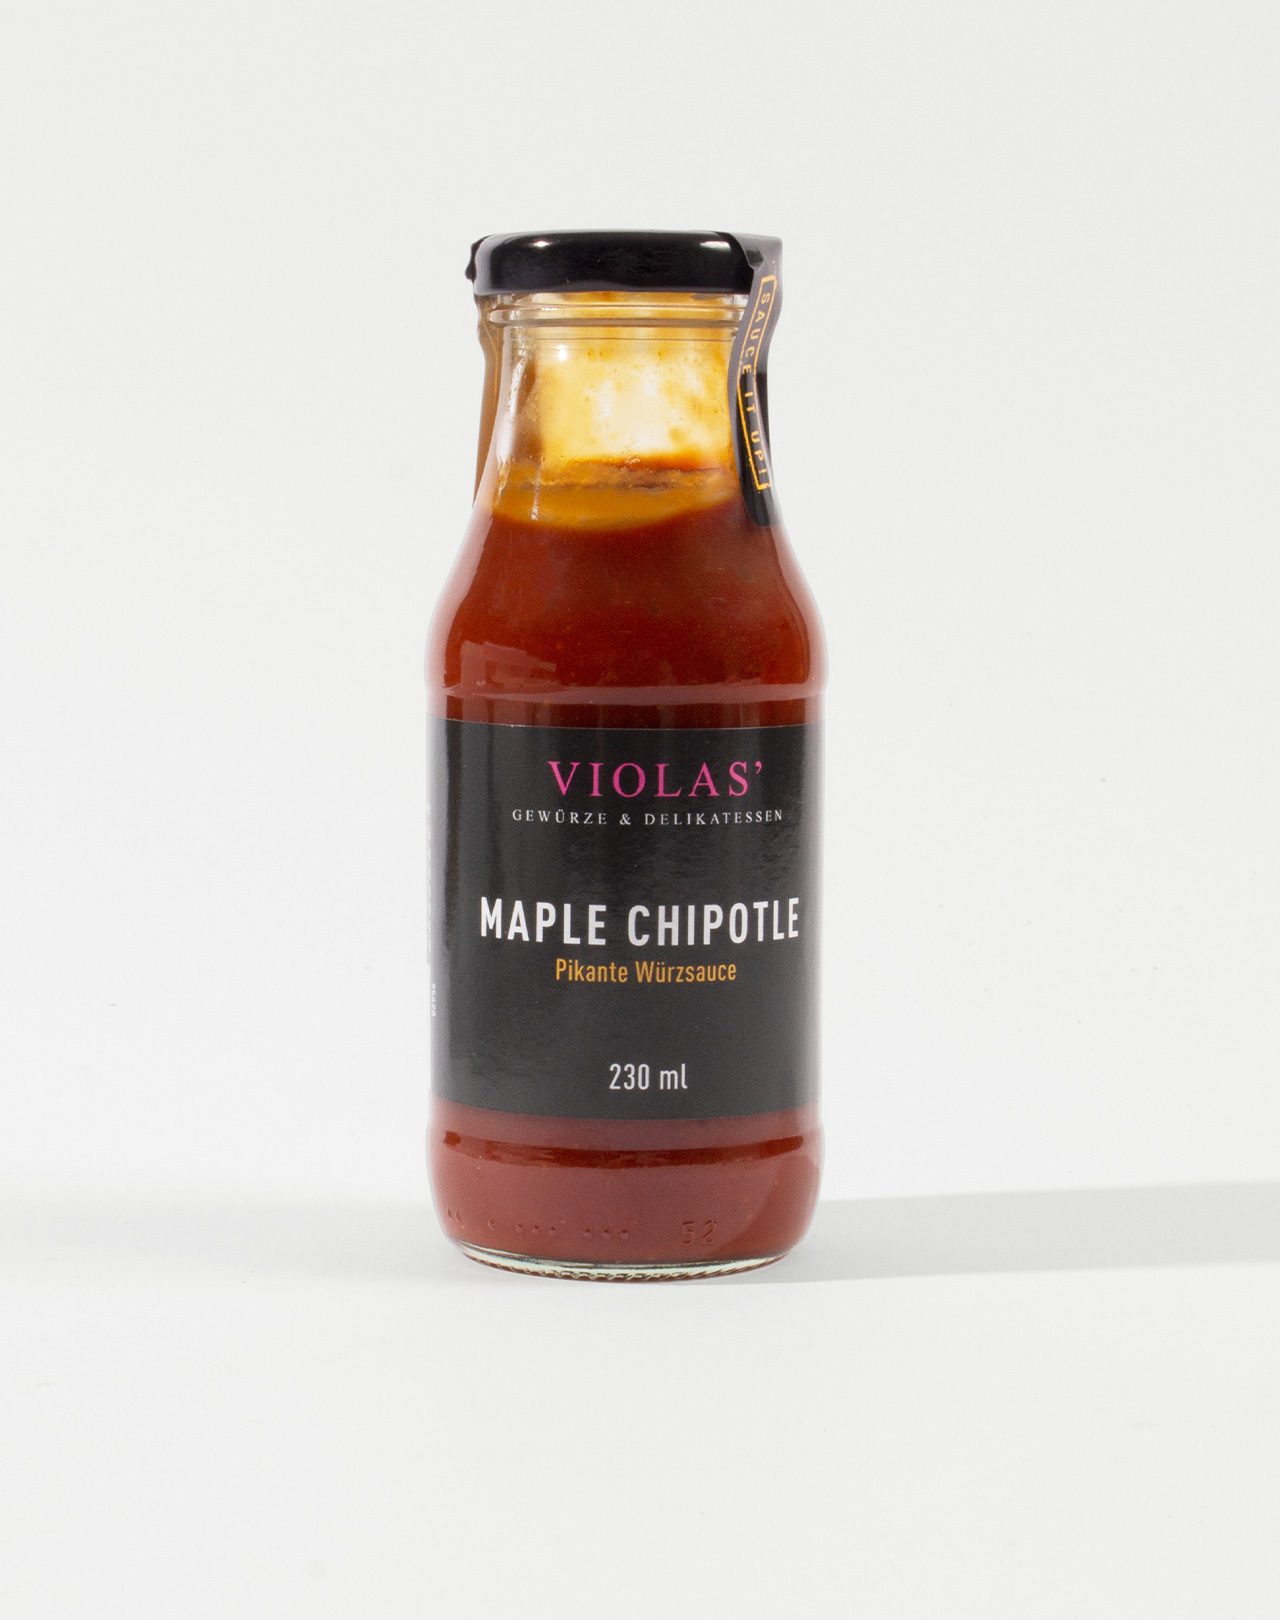 Sauce it up! Maple Chipotle